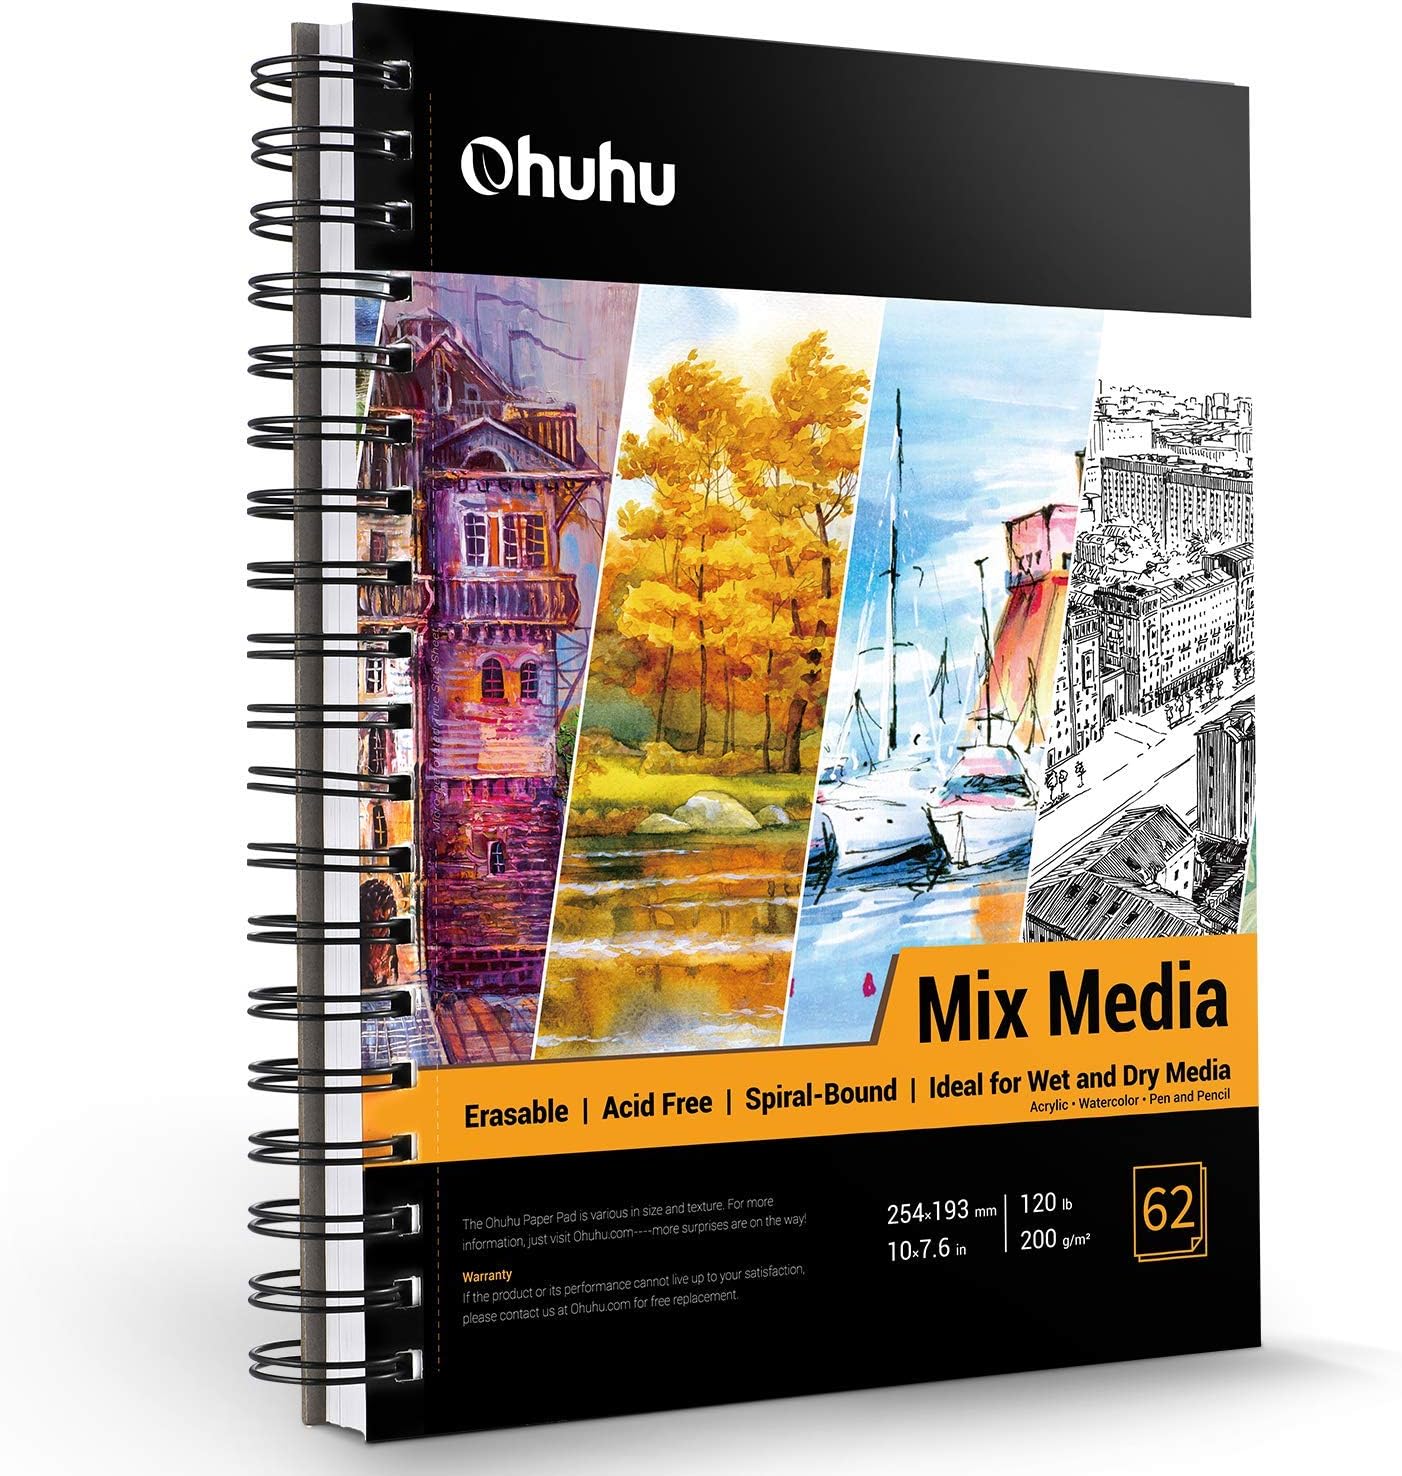 Ohuhu Mix Media Pad, Mixed Media Art Sketchbook, 120 LB/200 GSM Heavyweight Papers, Spiral Bound Mixed Media Paper Pad for Acrylic, Painting Christmas Gift